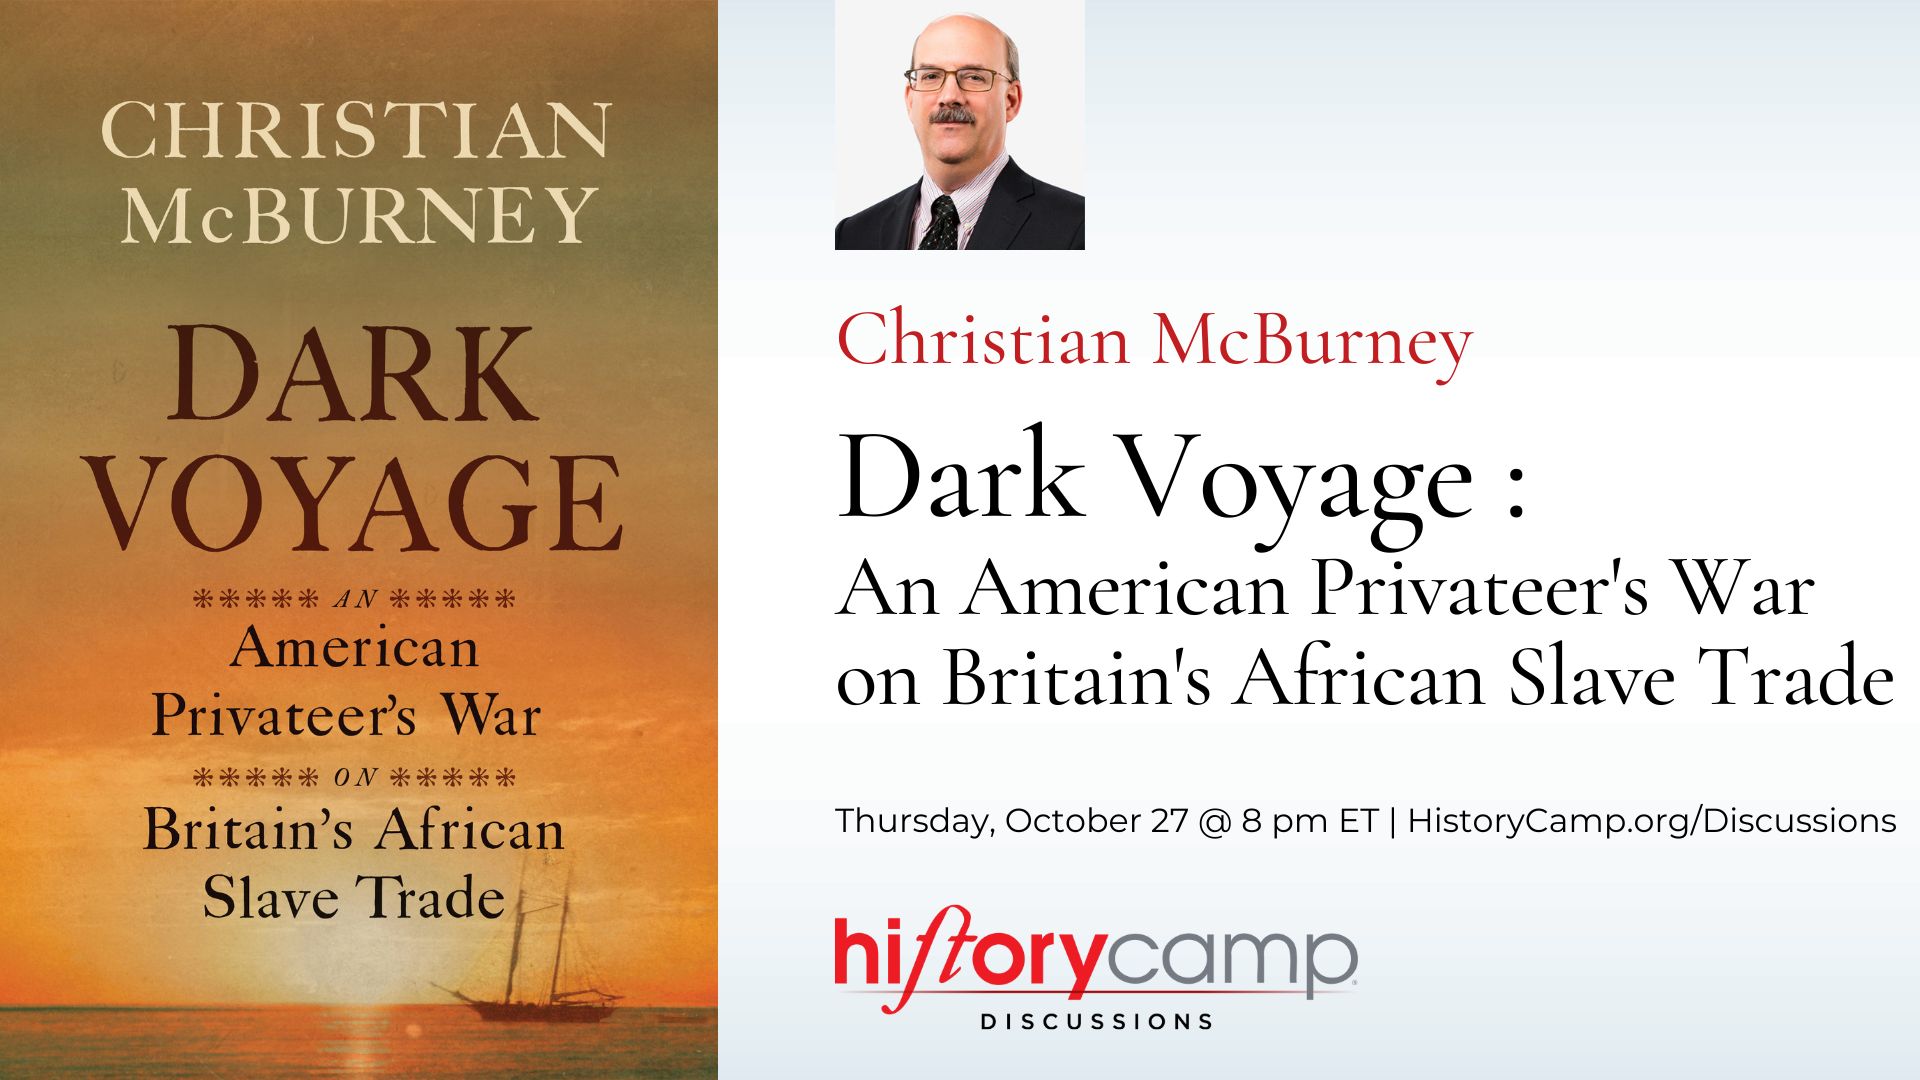 History Camp Discussion with Christian McBurney, author of "Dark Voyage : An American Privateer's War on Britain's African Slave Trade"